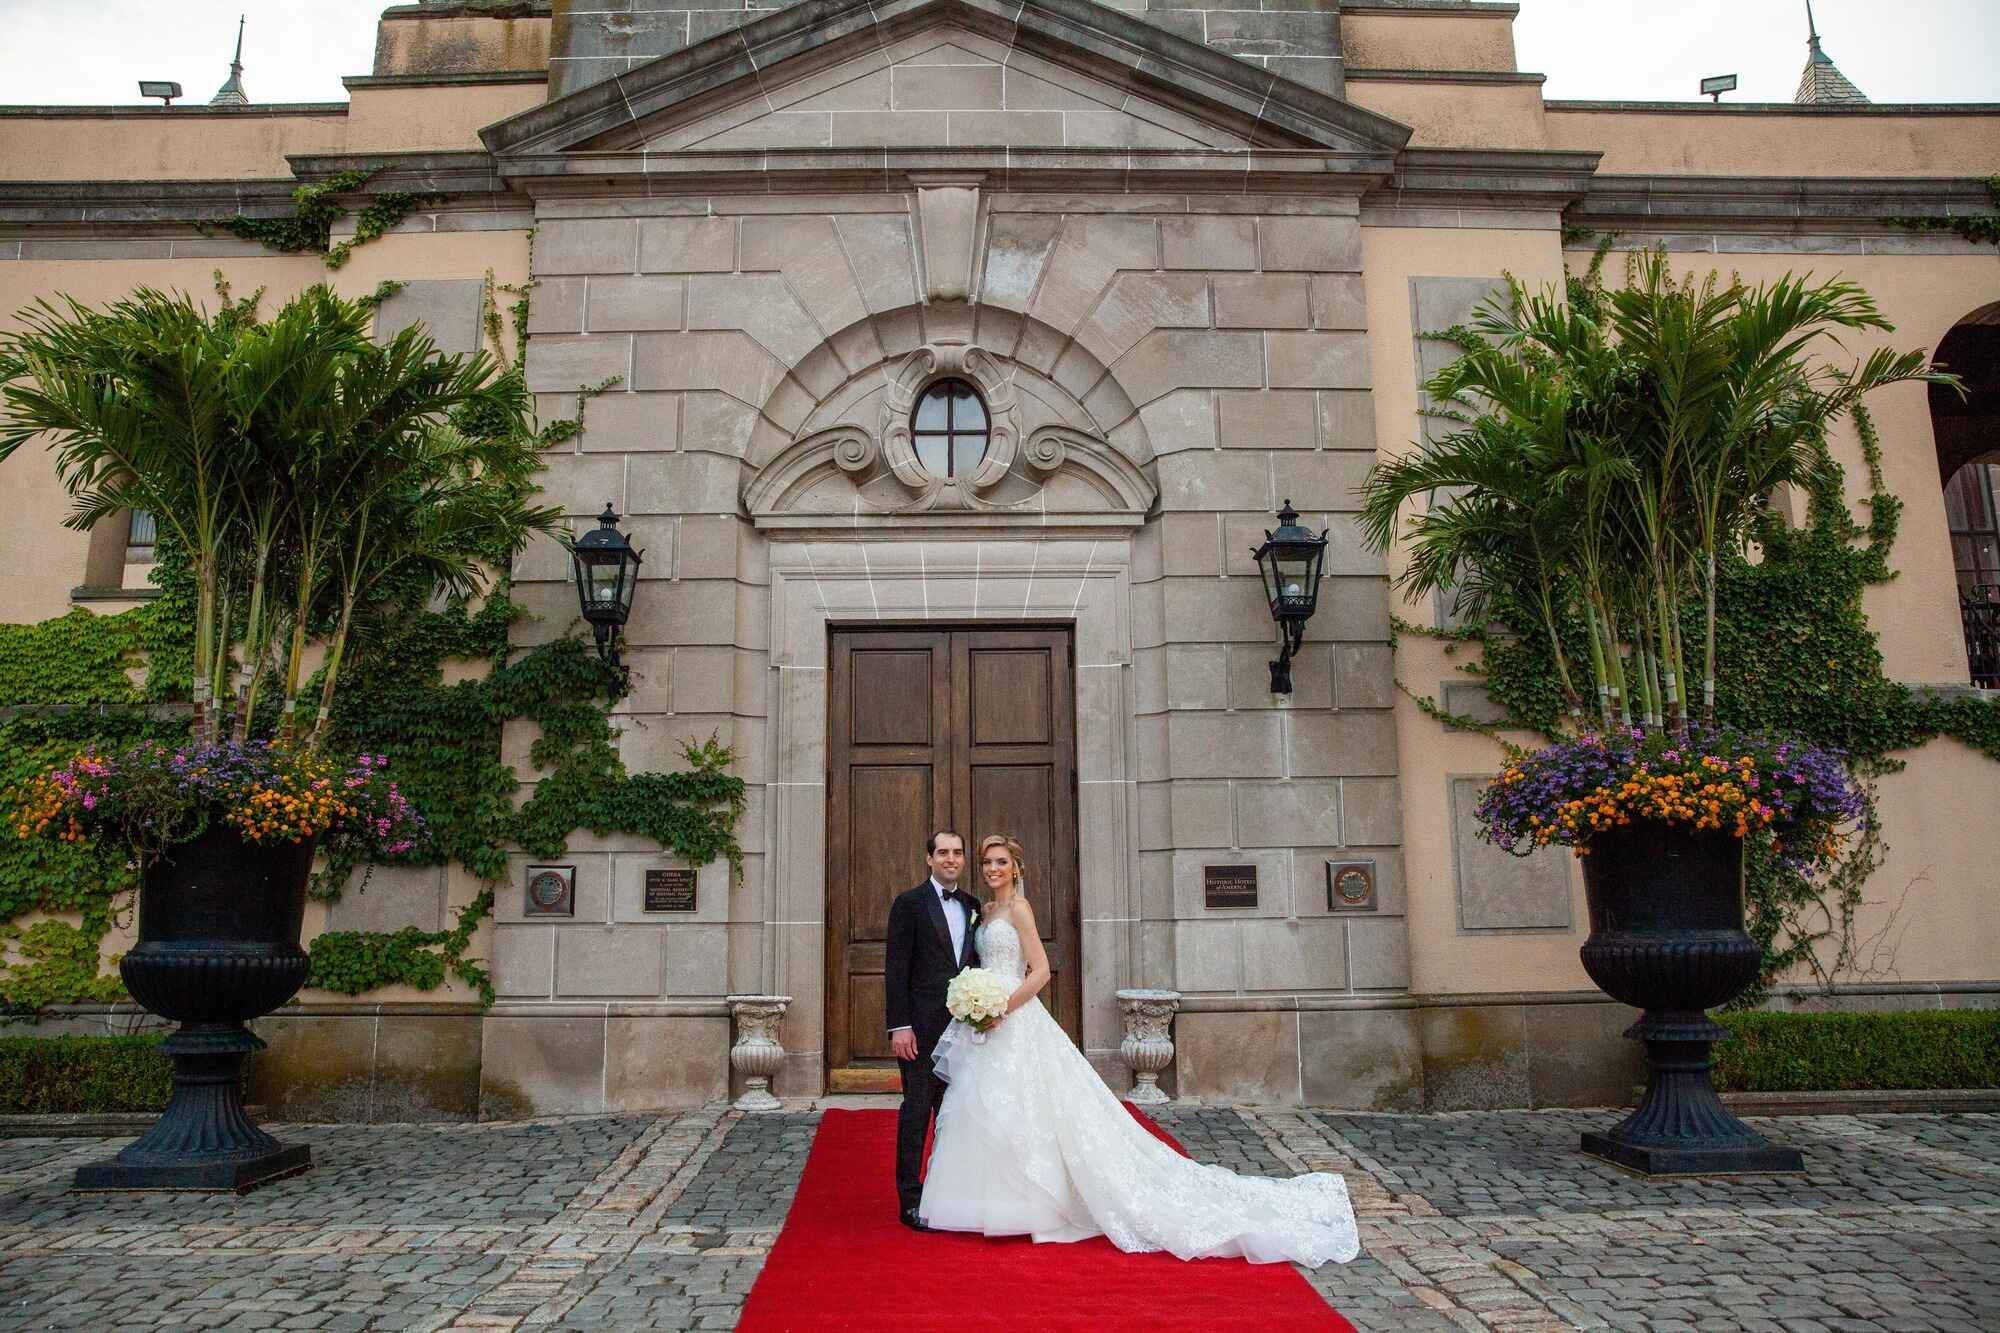 OHEKA CASTLE WEDDING BRIDE AND GROOM WITH RED CARPET